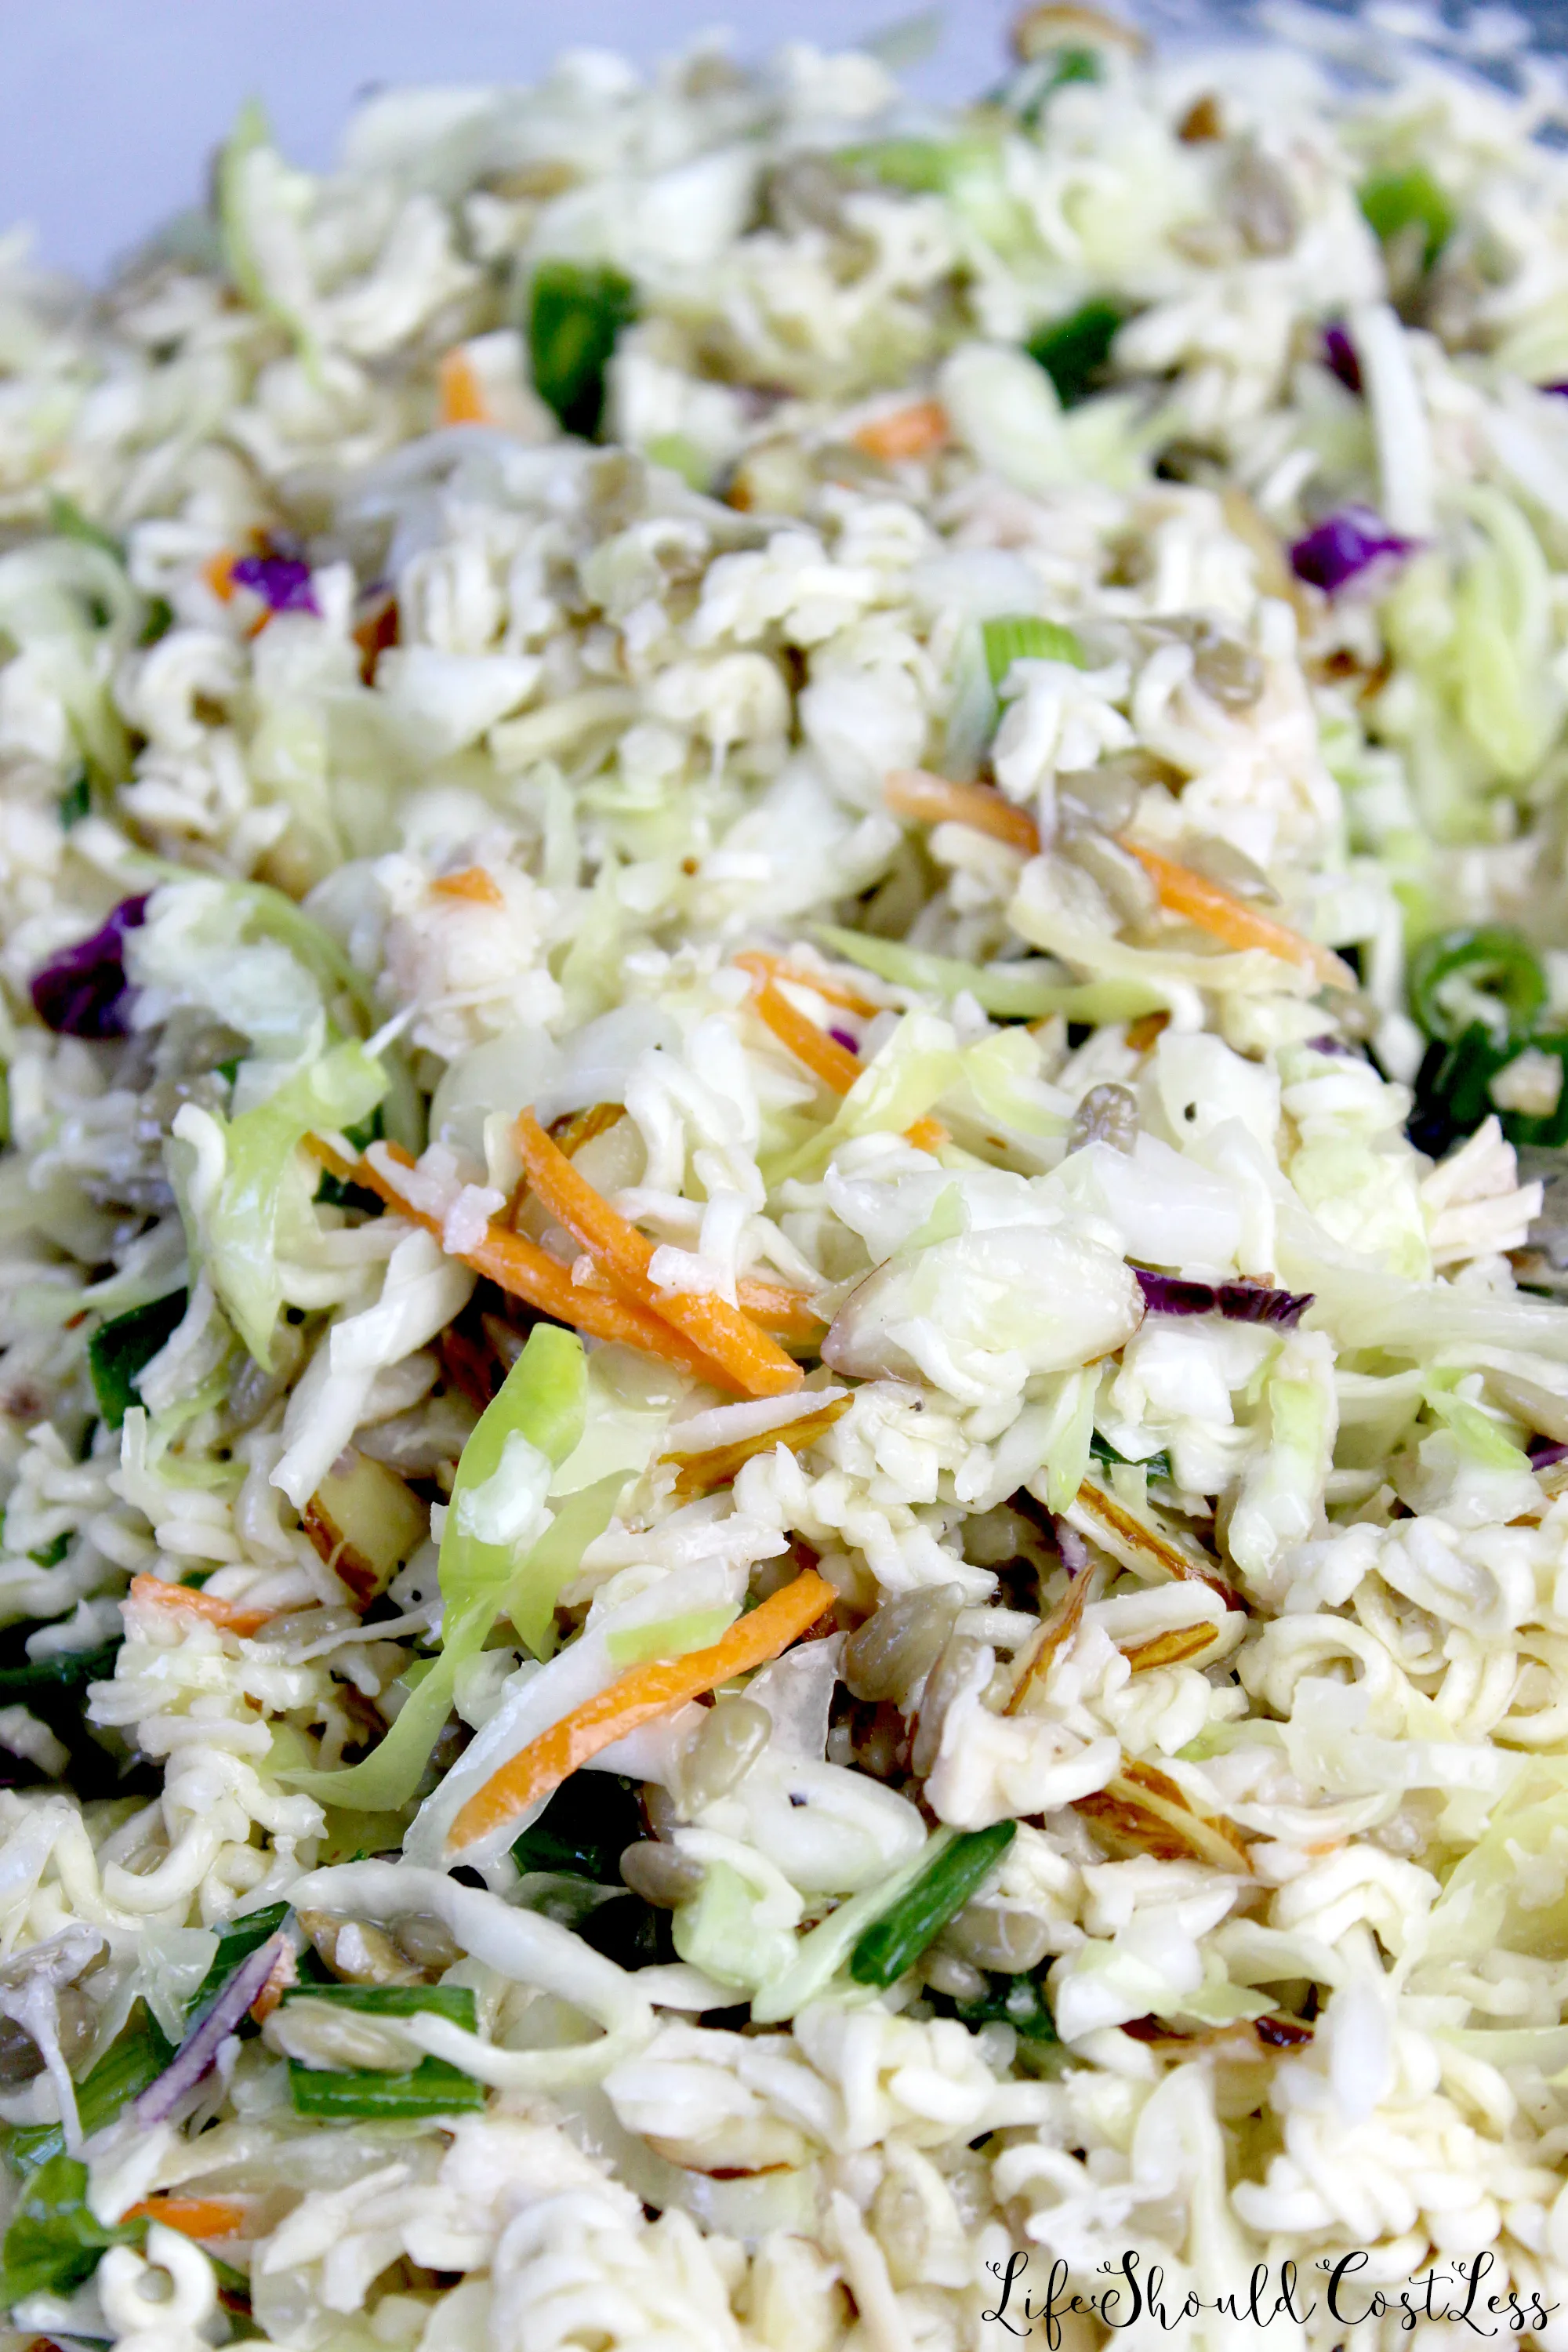 How to make oriental chicken salad with top ramen noodles and coleslaw.